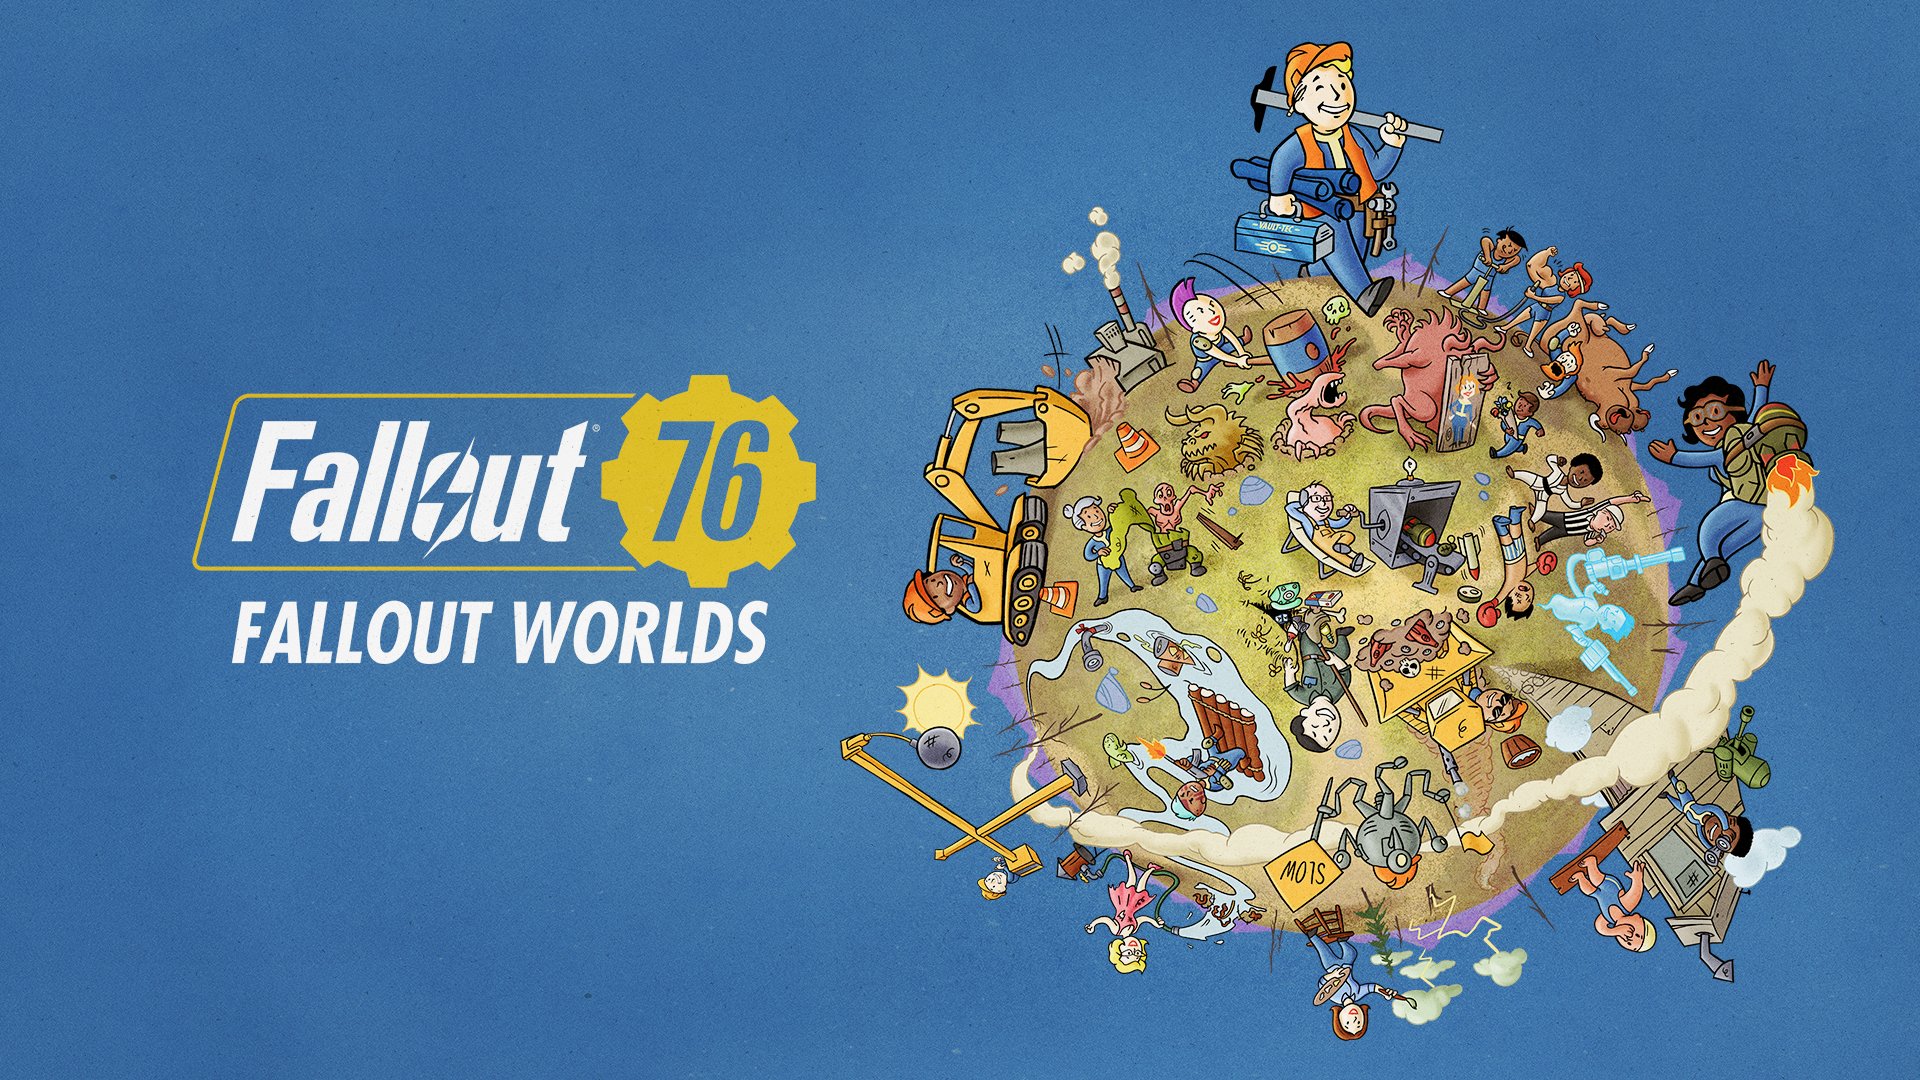 Fallout 76 Fallout Worlds PlayStation Now